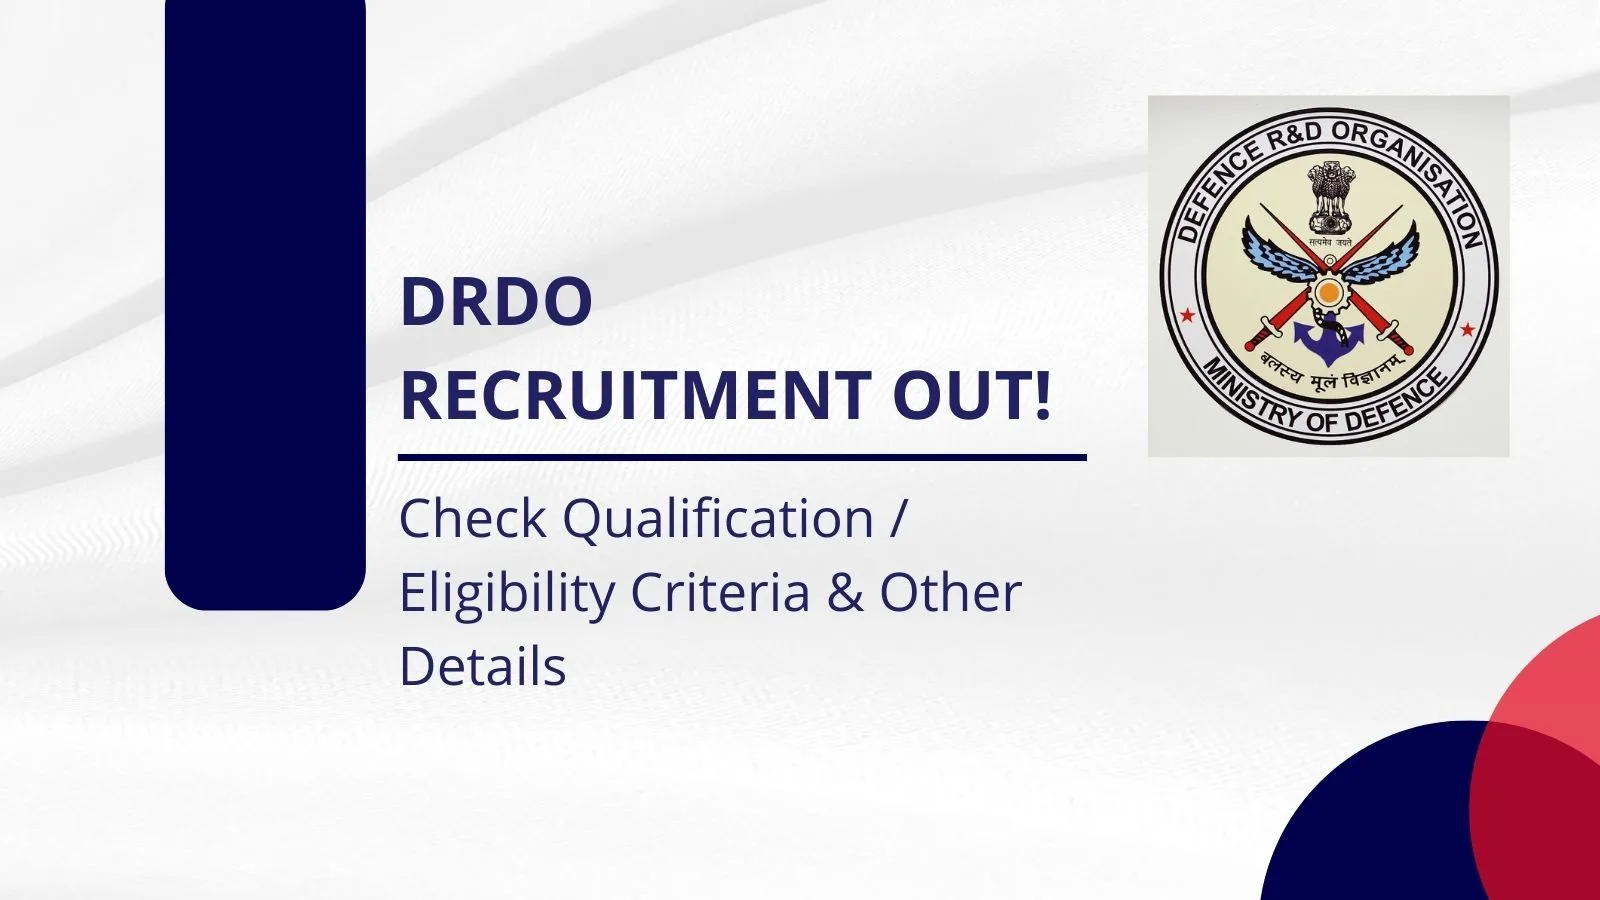 DRDO Recruitment out at Chandigarh by Interview, Check details here!